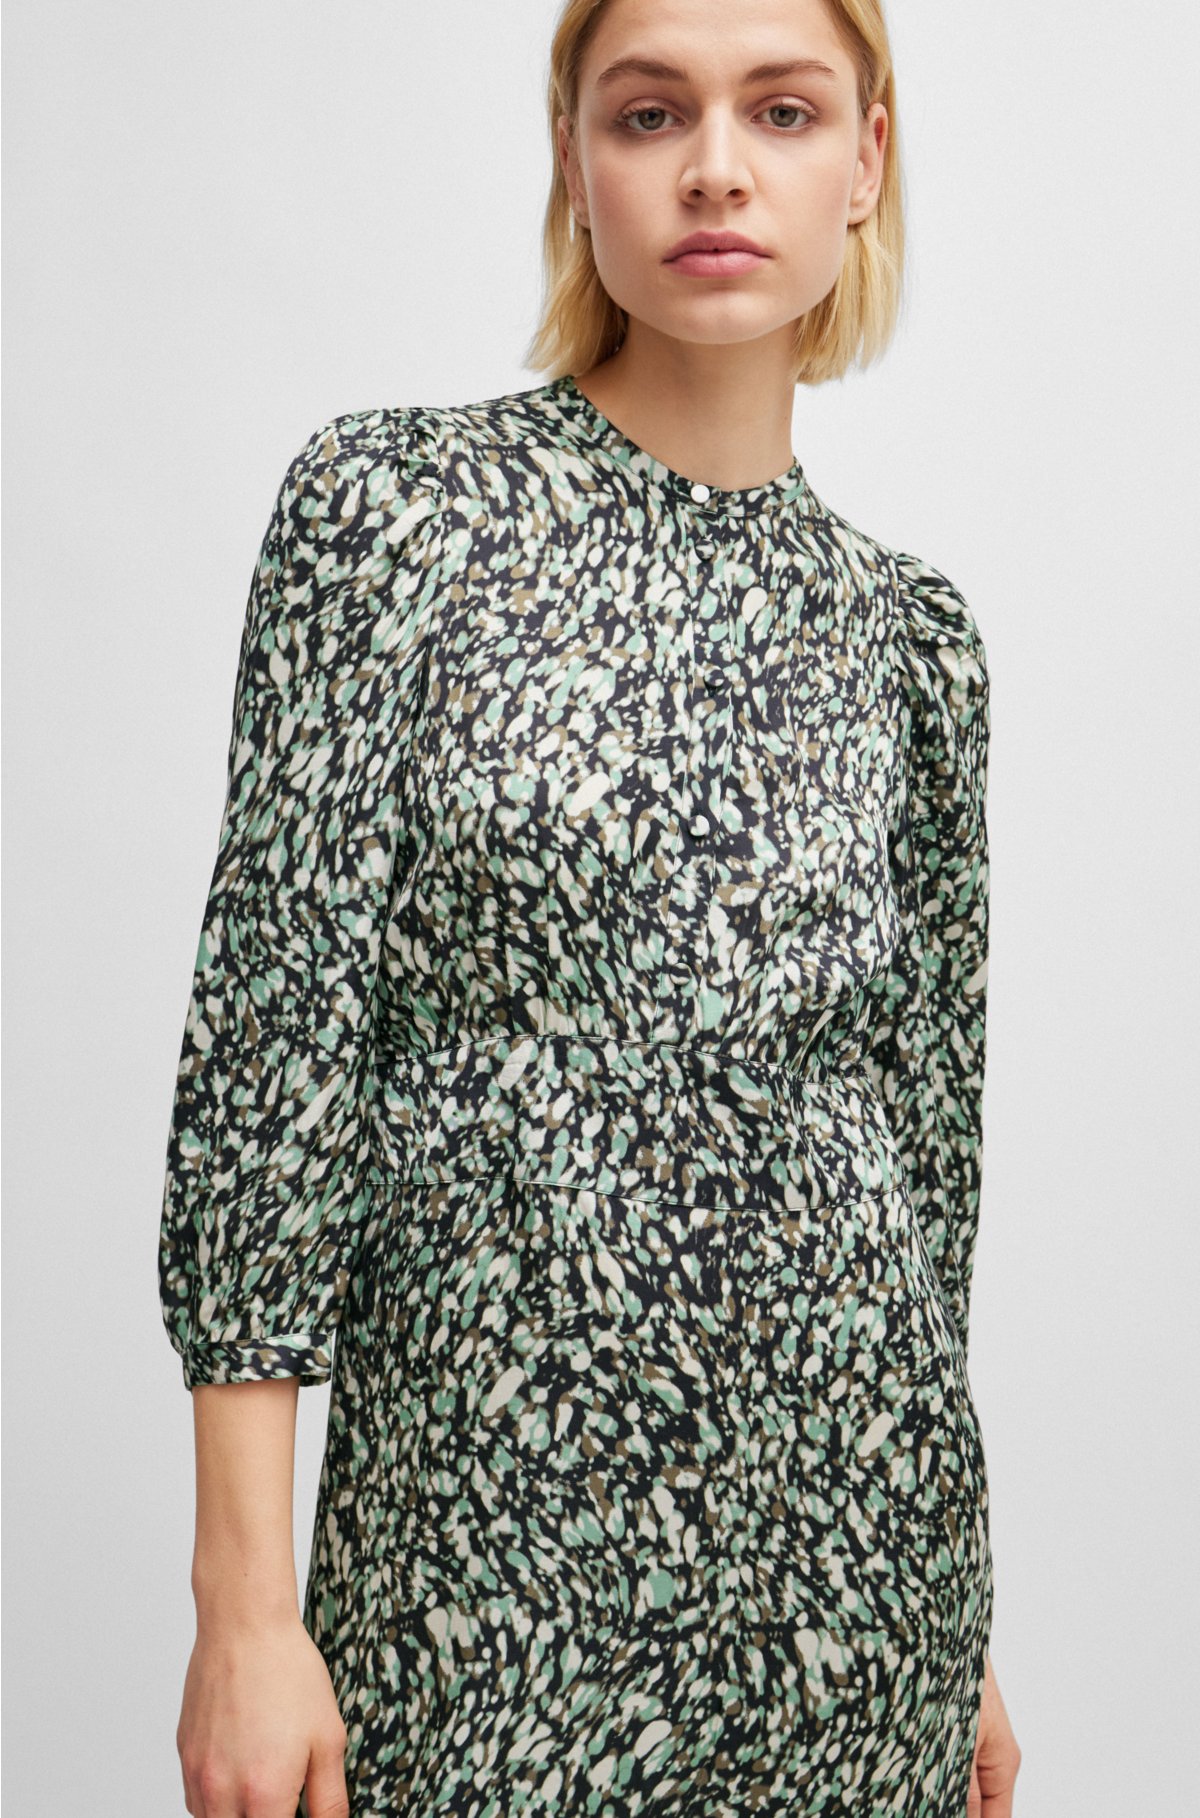 Long-sleeved dress in printed canvas with buttoned placket, Patterned